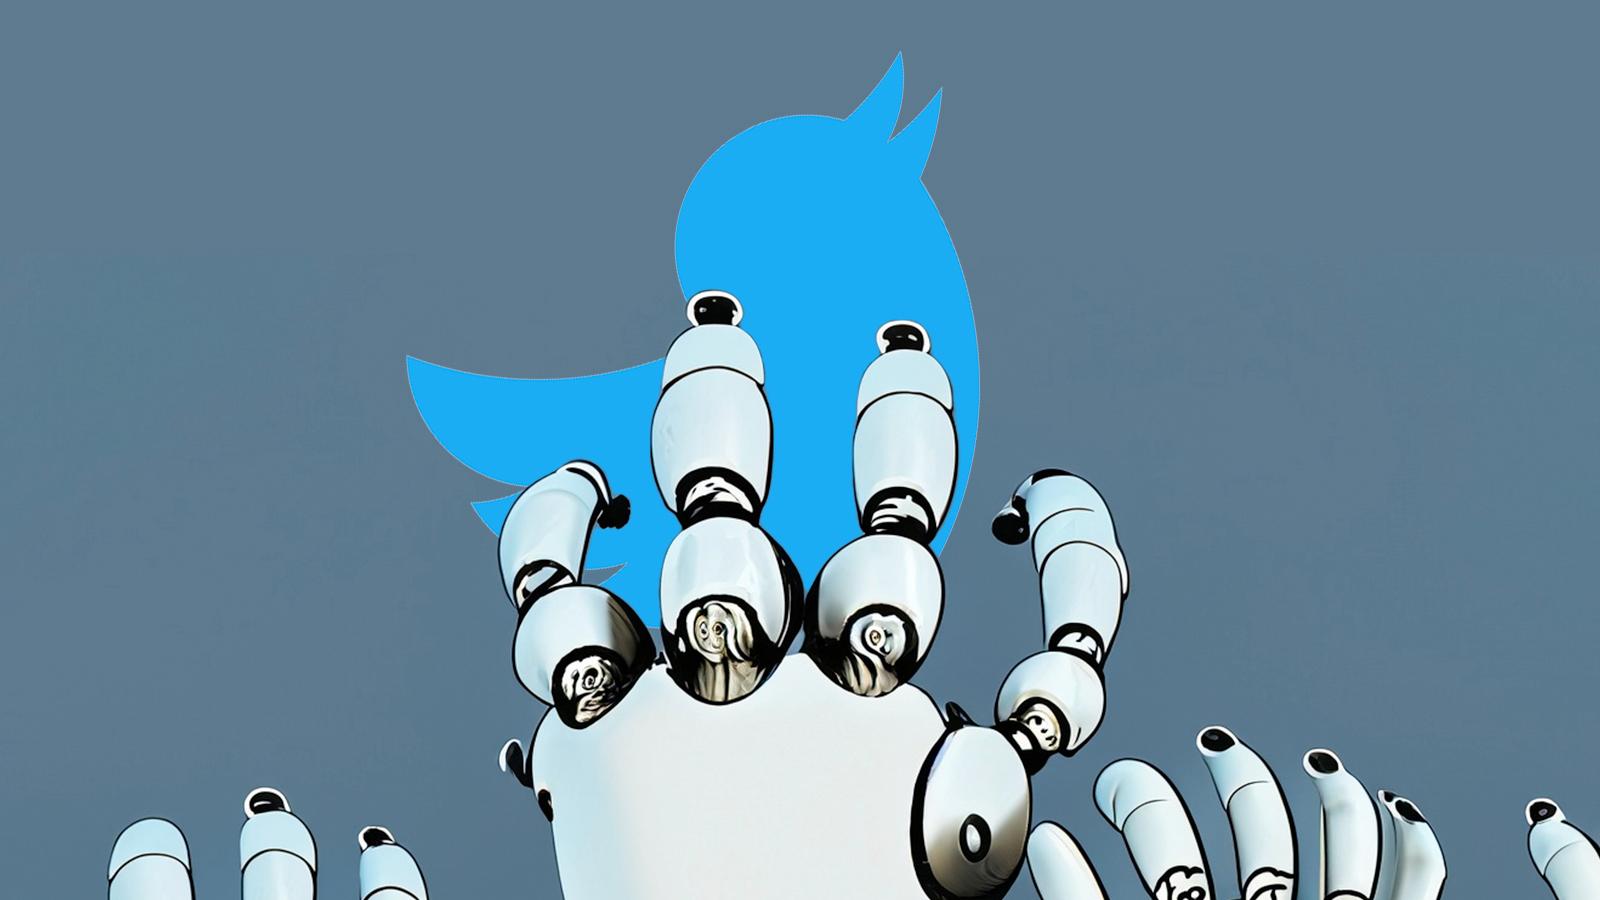 twitter logo being dragged by ai generated robot hands